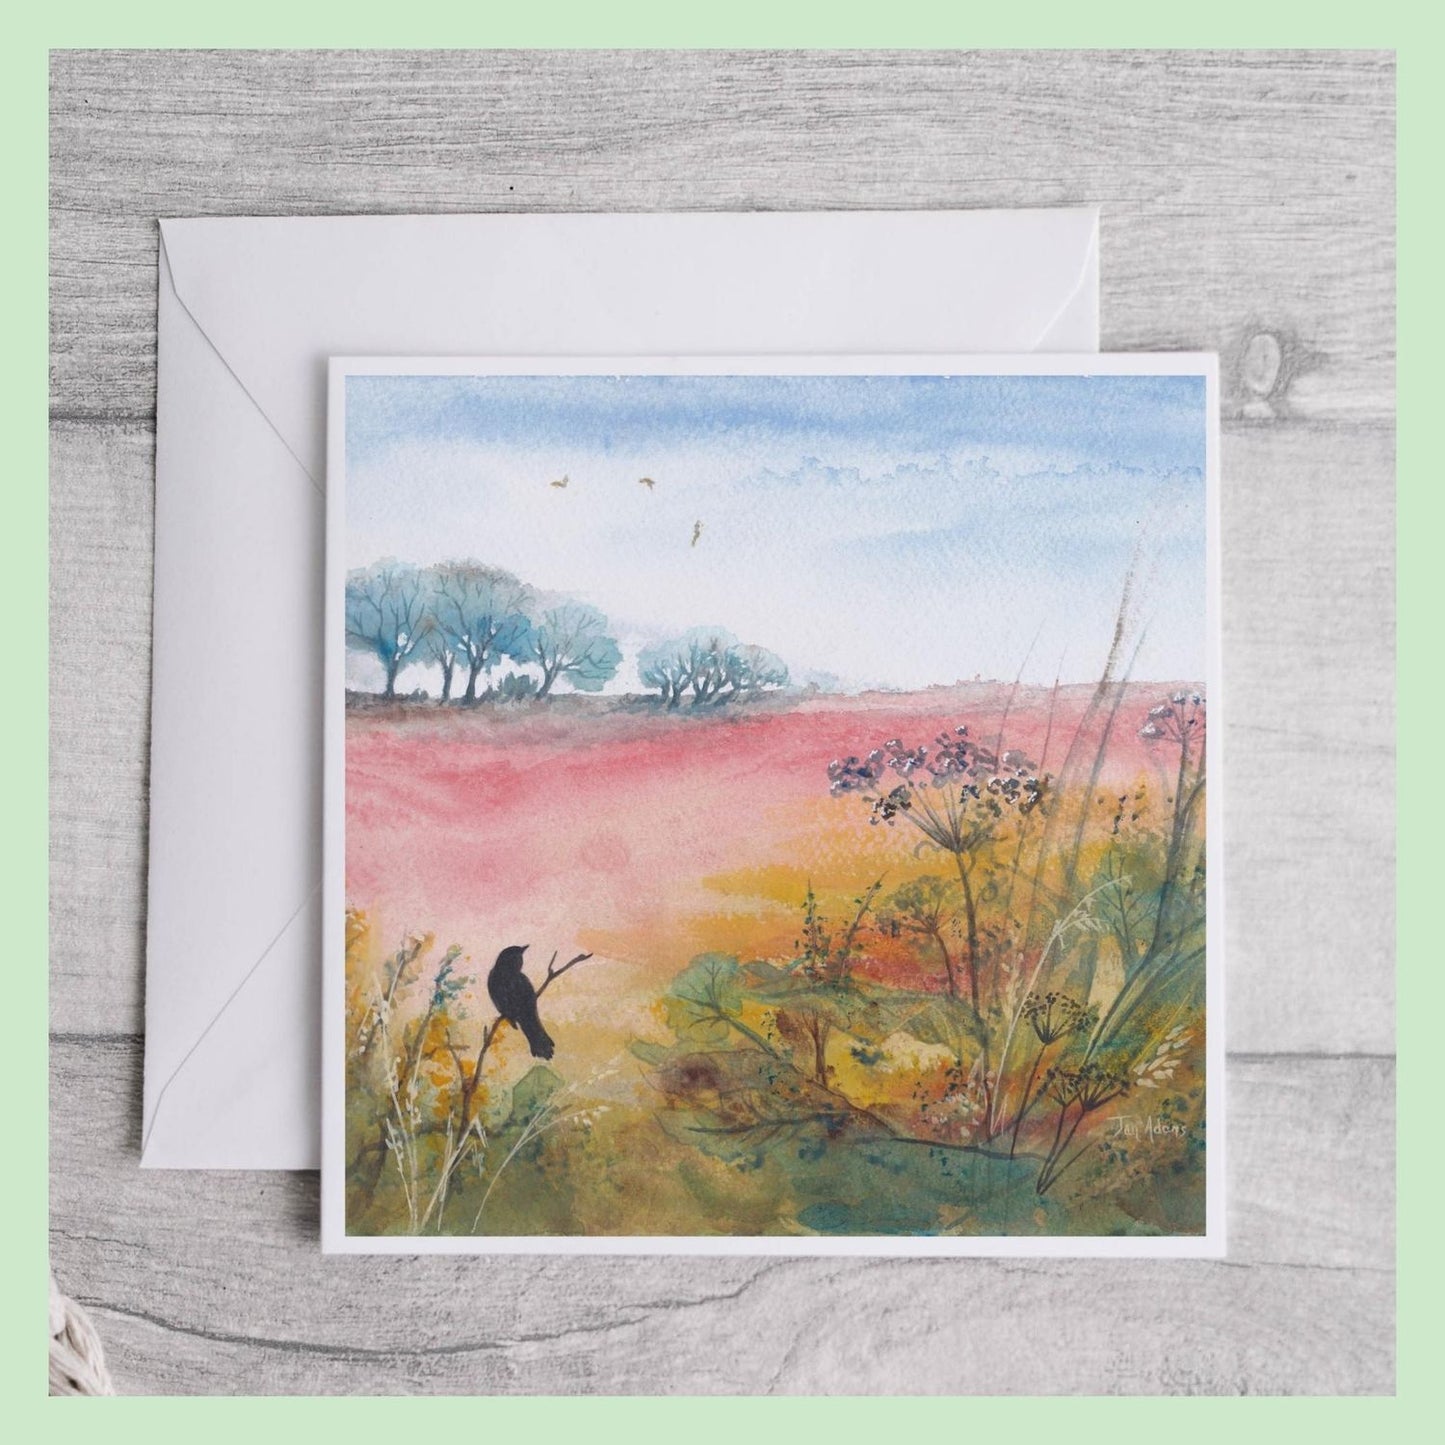 Greetings card with blackbird silhouette